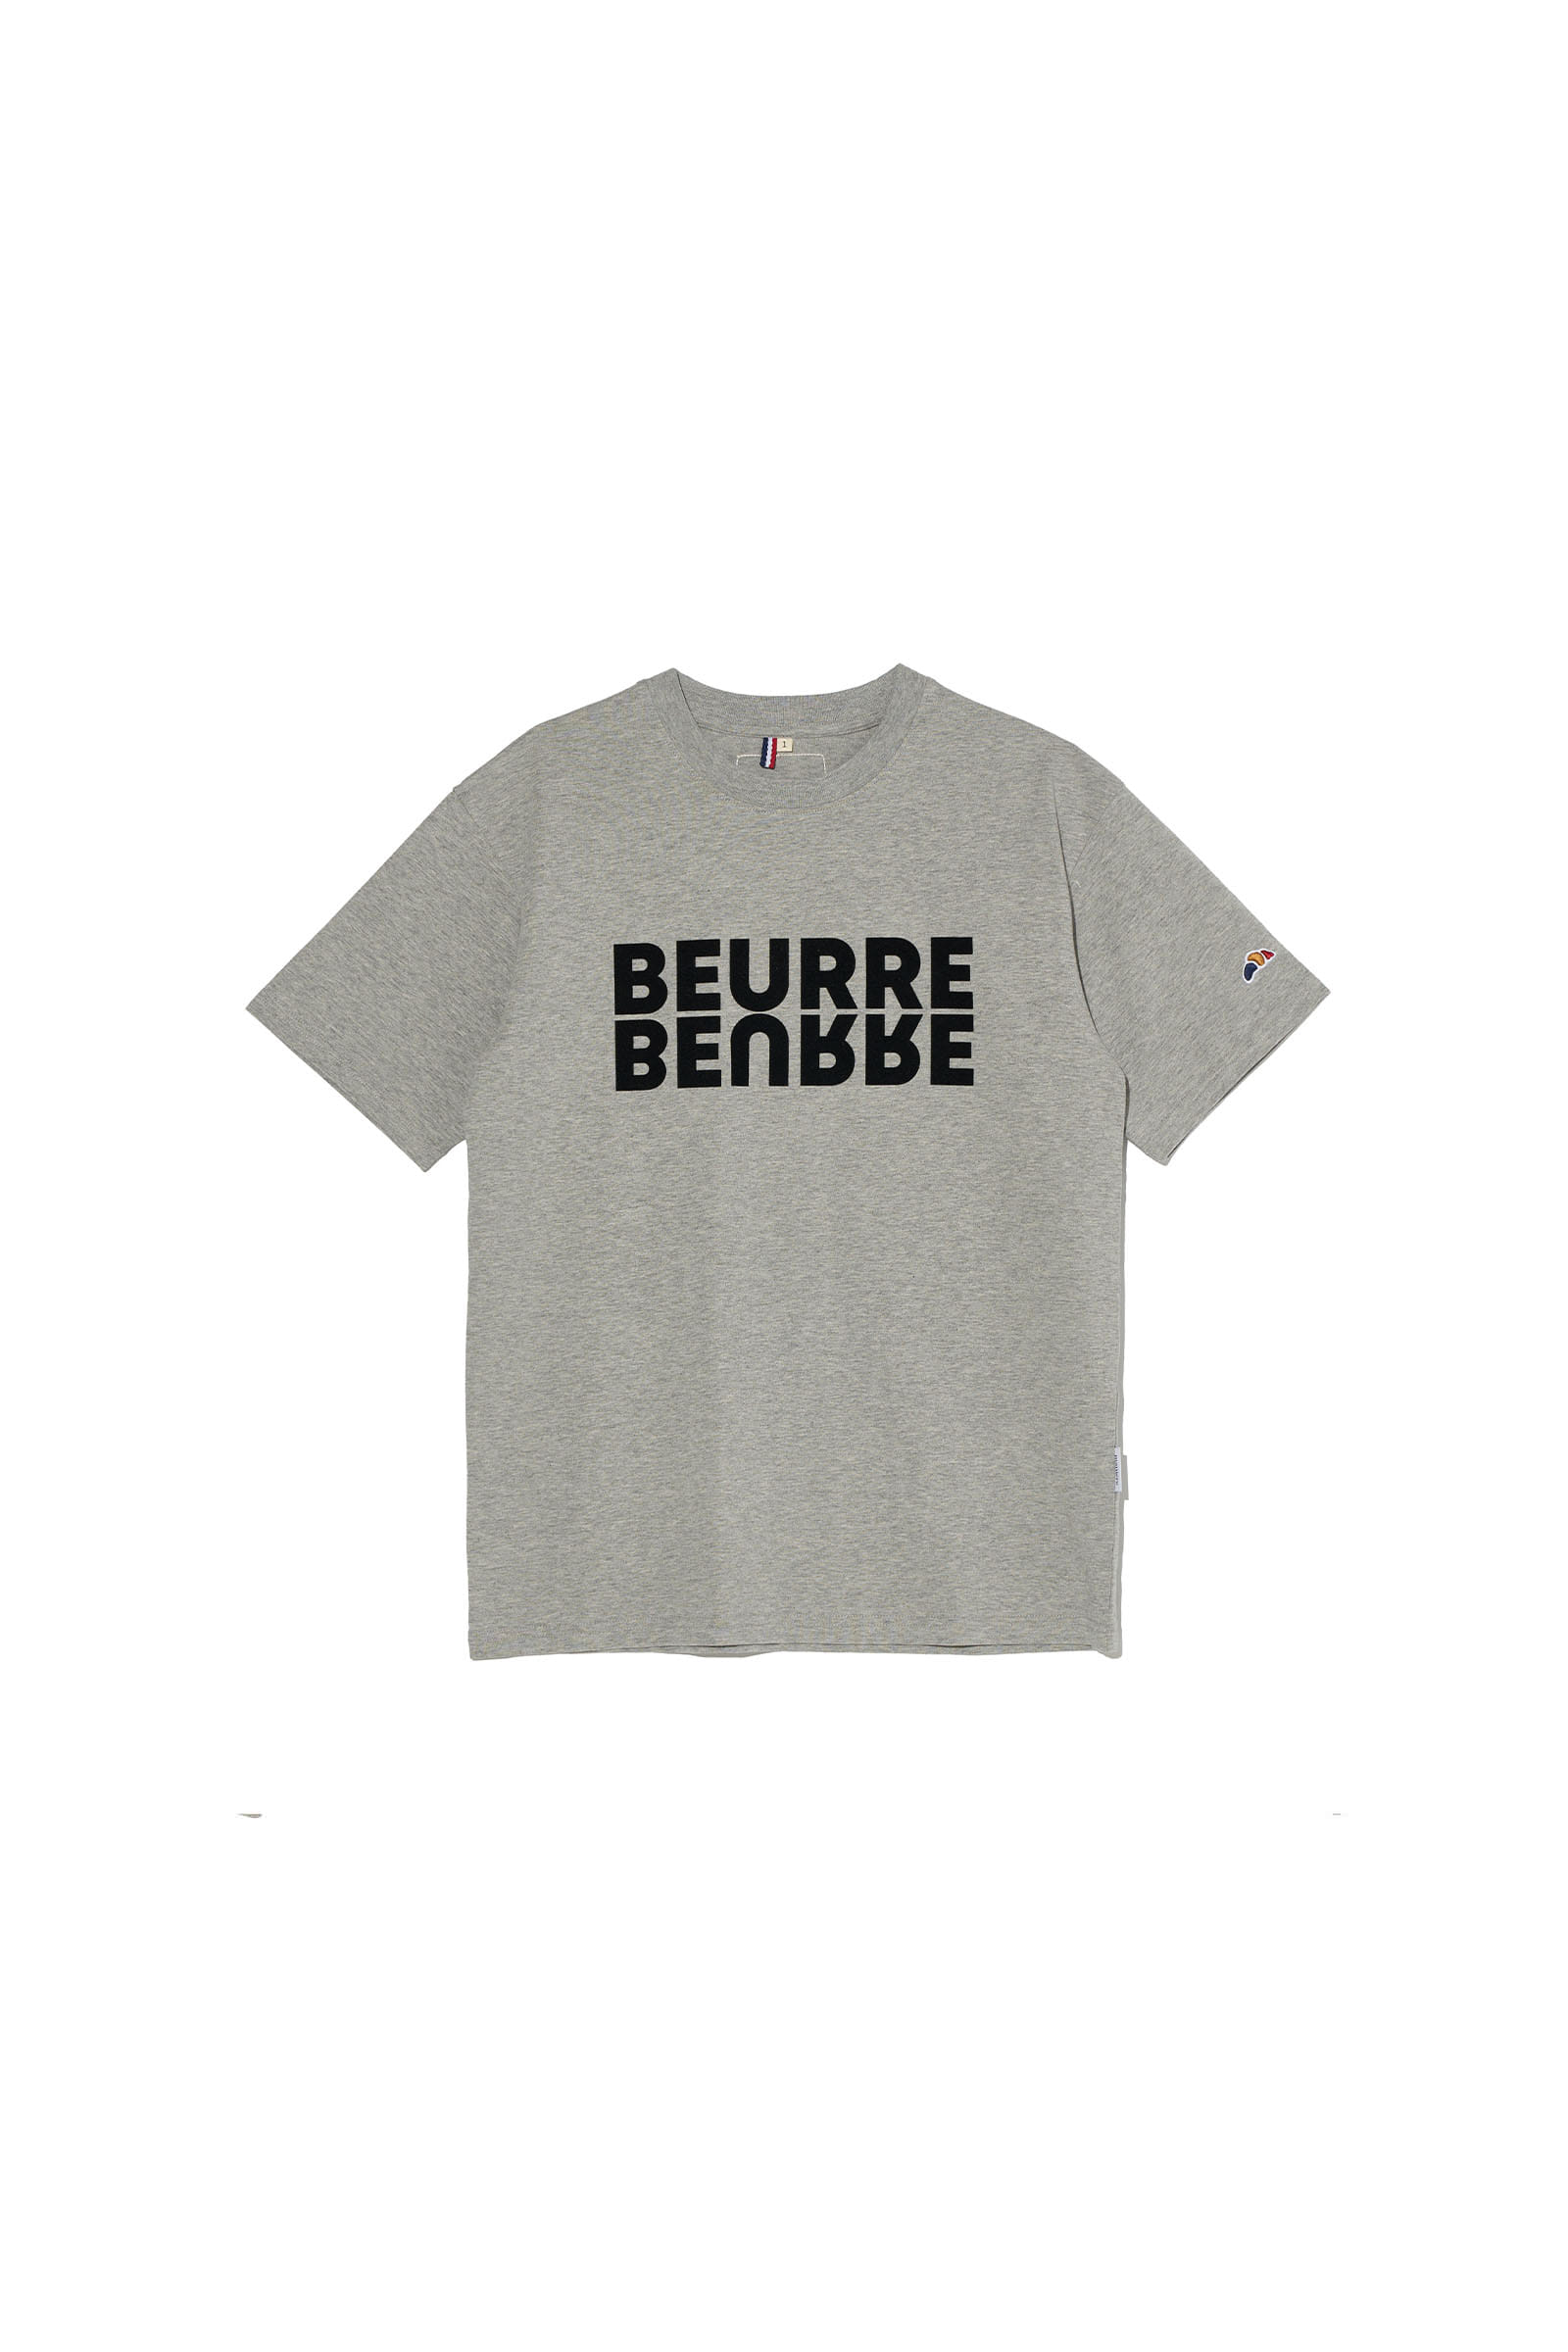 ep.6 BEURRE Decalcomanie T-shirts (Gray)